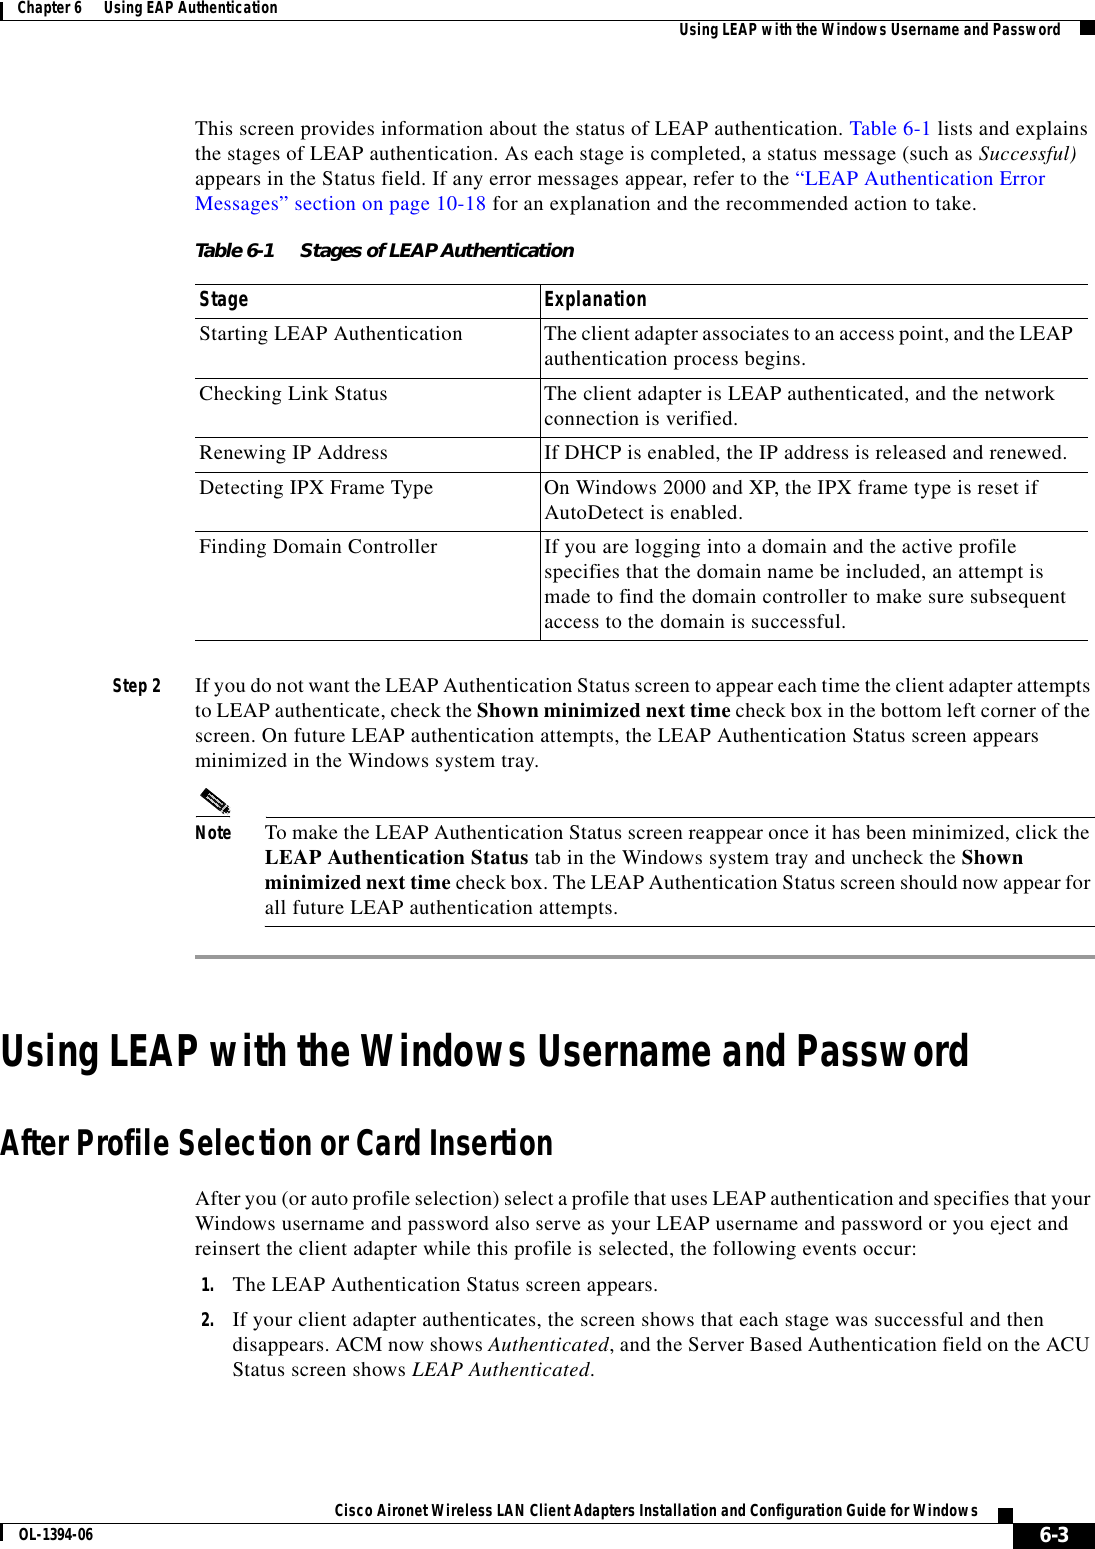 6-3Cisco Aironet Wireless LAN Client Adapters Installation and Configuration Guide for WindowsOL-1394-06Chapter 6      Using EAP Authentication Using LEAP with the Windows Username and PasswordThis screen provides information about the status of LEAP authentication. Table 6-1 lists and explains the stages of LEAP authentication. As each stage is completed, a status message (such as Successful)appears in the Status field. If any error messages appear, refer to the “LEAP Authentication Error Messages” section on page 10-18 for an explanation and the recommended action to take. Step 2 If you do not want the LEAP Authentication Status screen to appear each time the client adapter attempts to LEAP authenticate, check the Shown minimized next time check box in the bottom left corner of the screen. On future LEAP authentication attempts, the LEAP Authentication Status screen appears minimized in the Windows system tray.Note To make the LEAP Authentication Status screen reappear once it has been minimized, click the LEAP Authentication Status tab in the Windows system tray and uncheck the Shown minimized next time check box. The LEAP Authentication Status screen should now appear for all future LEAP authentication attempts.Using LEAP with the Windows Username and PasswordAfter Profile Selection or Card InsertionAfter you (or auto profile selection) select a profile that uses LEAP authentication and specifies that your Windows username and password also serve as your LEAP username and password or you eject and reinsert the client adapter while this profile is selected, the following events occur:1. The LEAP Authentication Status screen appears.2. If your client adapter authenticates, the screen shows that each stage was successful and then disappears. ACM now shows Authenticated, and the Server Based Authentication field on the ACU Status screen shows LEAP Authenticated.Table 6-1 Stages of LEAP Authentication Stage ExplanationStarting LEAP Authentication The client adapter associates to an access point, and the LEAP authentication process begins.Checking Link Status The client adapter is LEAP authenticated, and the network connection is verified.Renewing IP Address If DHCP is enabled, the IP address is released and renewed.Detecting IPX Frame Type On Windows 2000 and XP, the IPX frame type is reset if AutoDetect is enabled.Finding Domain Controller If you are logging into a domain and the active profile specifies that the domain name be included, an attempt is made to find the domain controller to make sure subsequent access to the domain is successful.